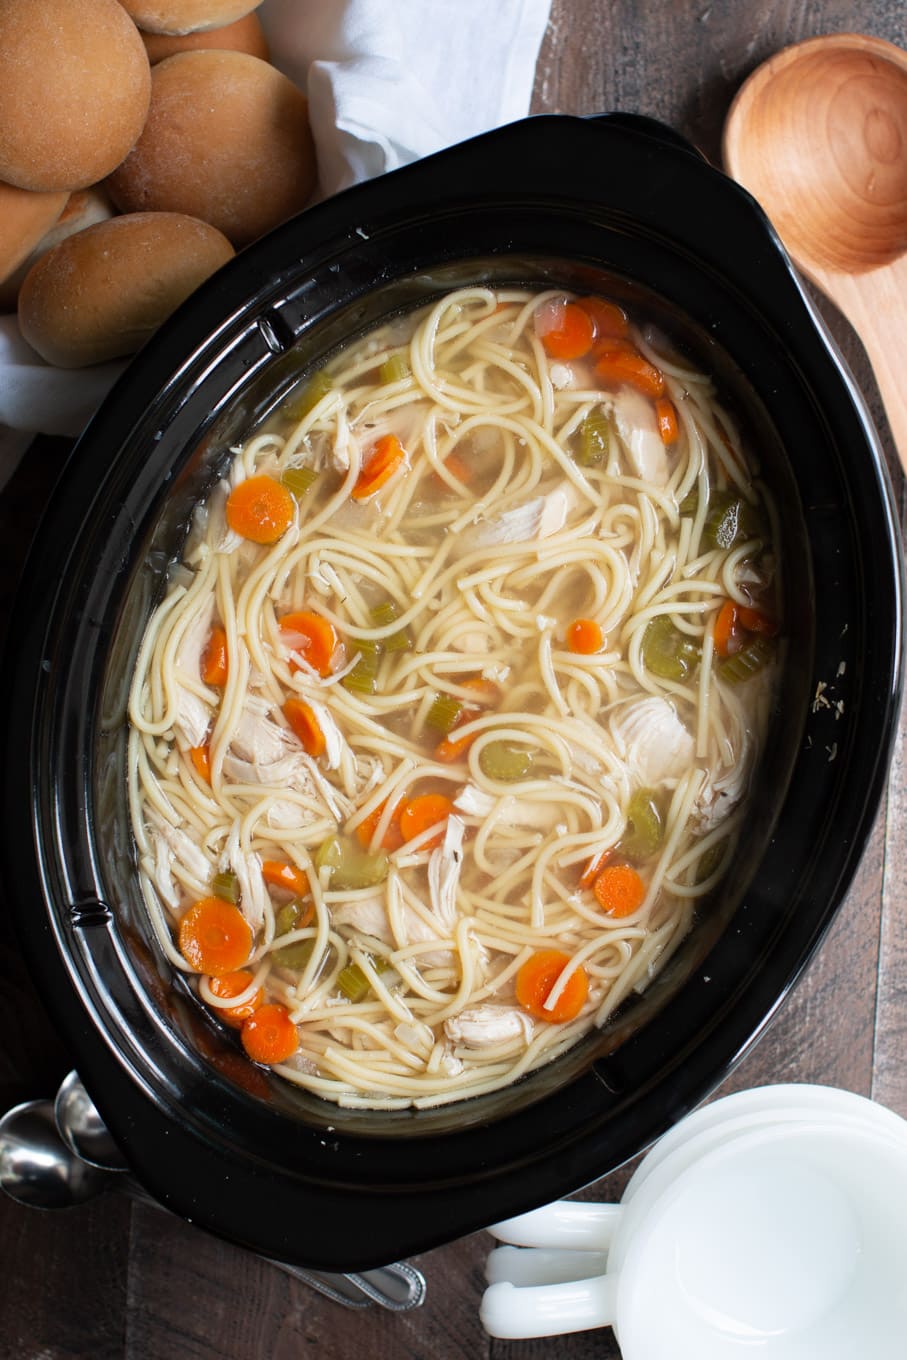 Chicken noodle soup in a slow cooker with spaghetti type noodles, carrots and celery.